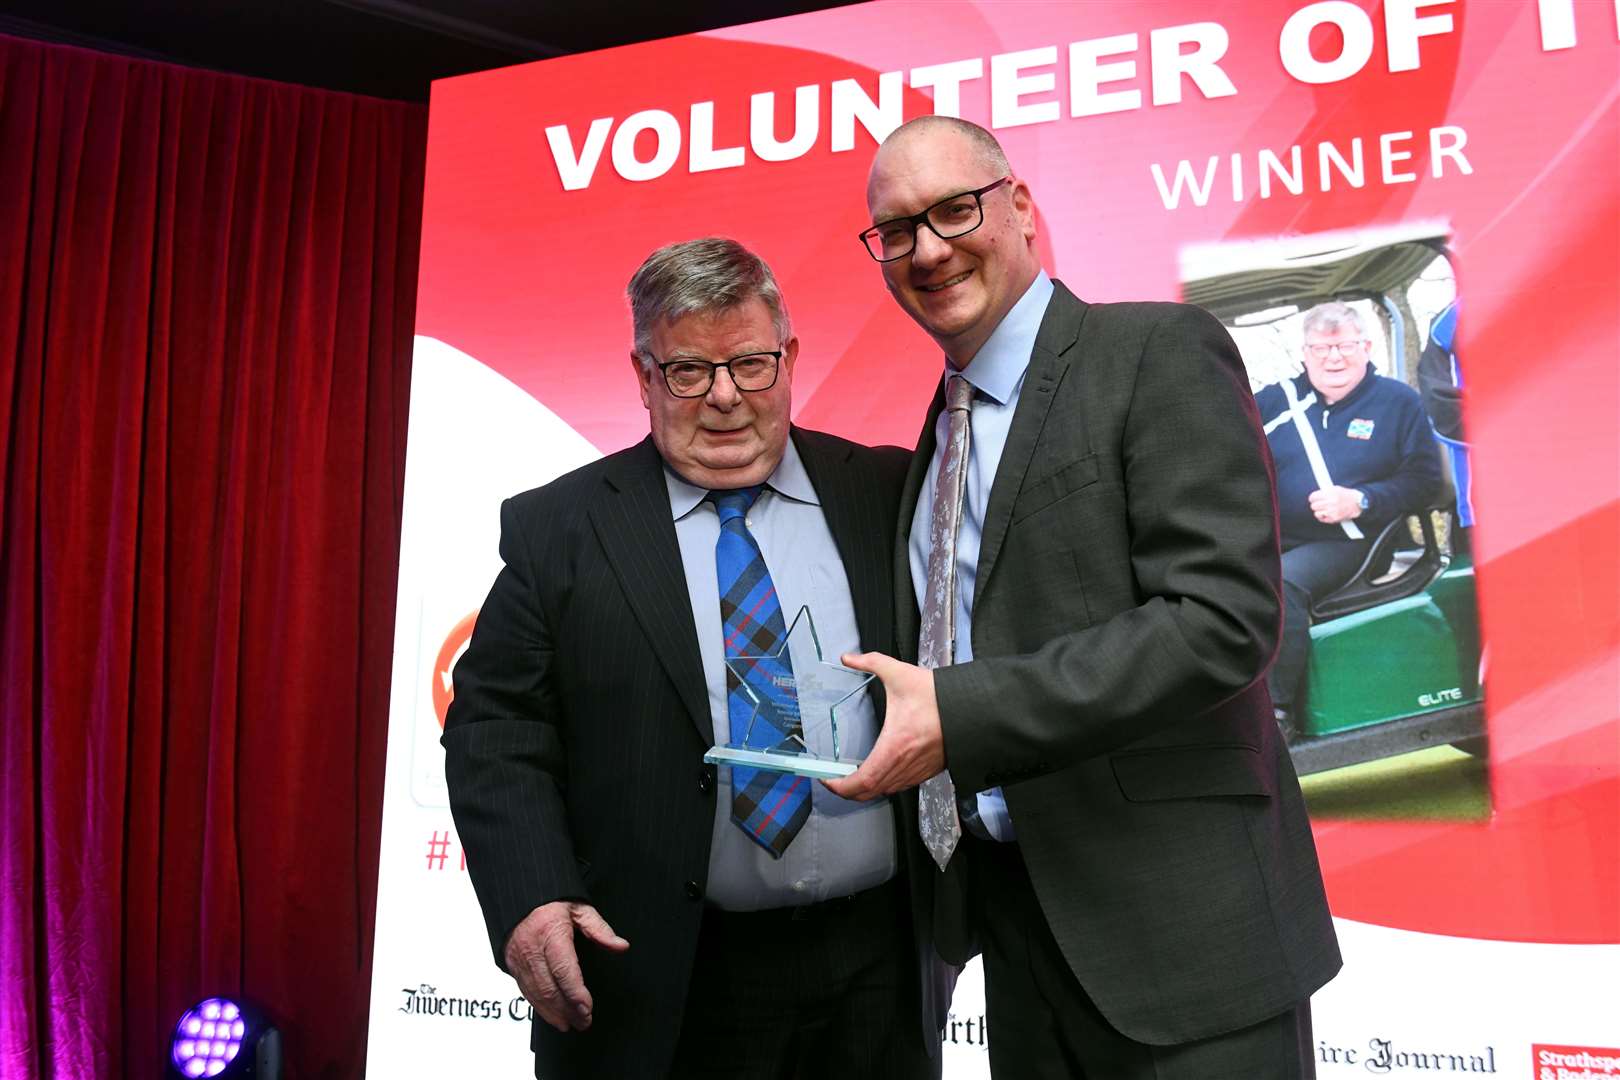 Ronnie Mitchell won the Volunteer of the Year Award. The accolade was presented by Chris Dowling of Cairngorm Group. Picture: James Mackenzie.